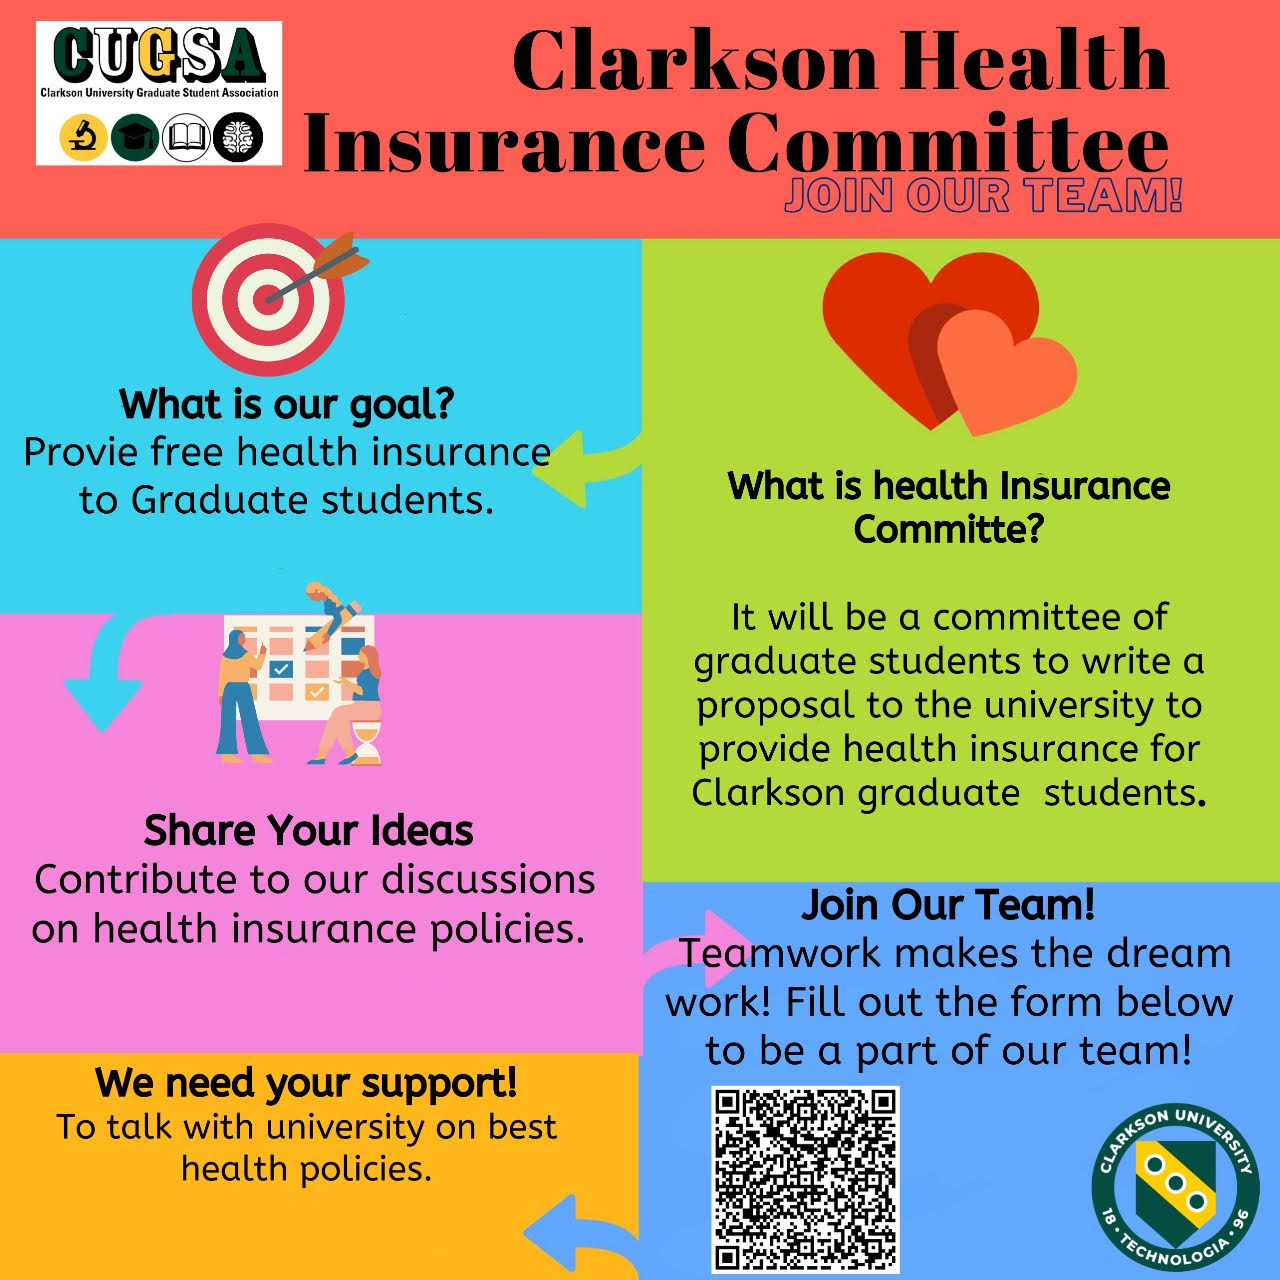 Clarkson Health Insurance Committee What is health Insurance Committe? It will be a committee of graduate students to write a proposal to the university to provide health insurance for Clarkson graduate students. We need your support! To talk with university on best health policies. Share Your Ideas Contribute to our discussions on health insurance policies. What is our goal? Provie free health insurance to Graduate students. Join our team! Join Our Team! Teamwork makes the dream work! Fill out the form below to be a part of our team!